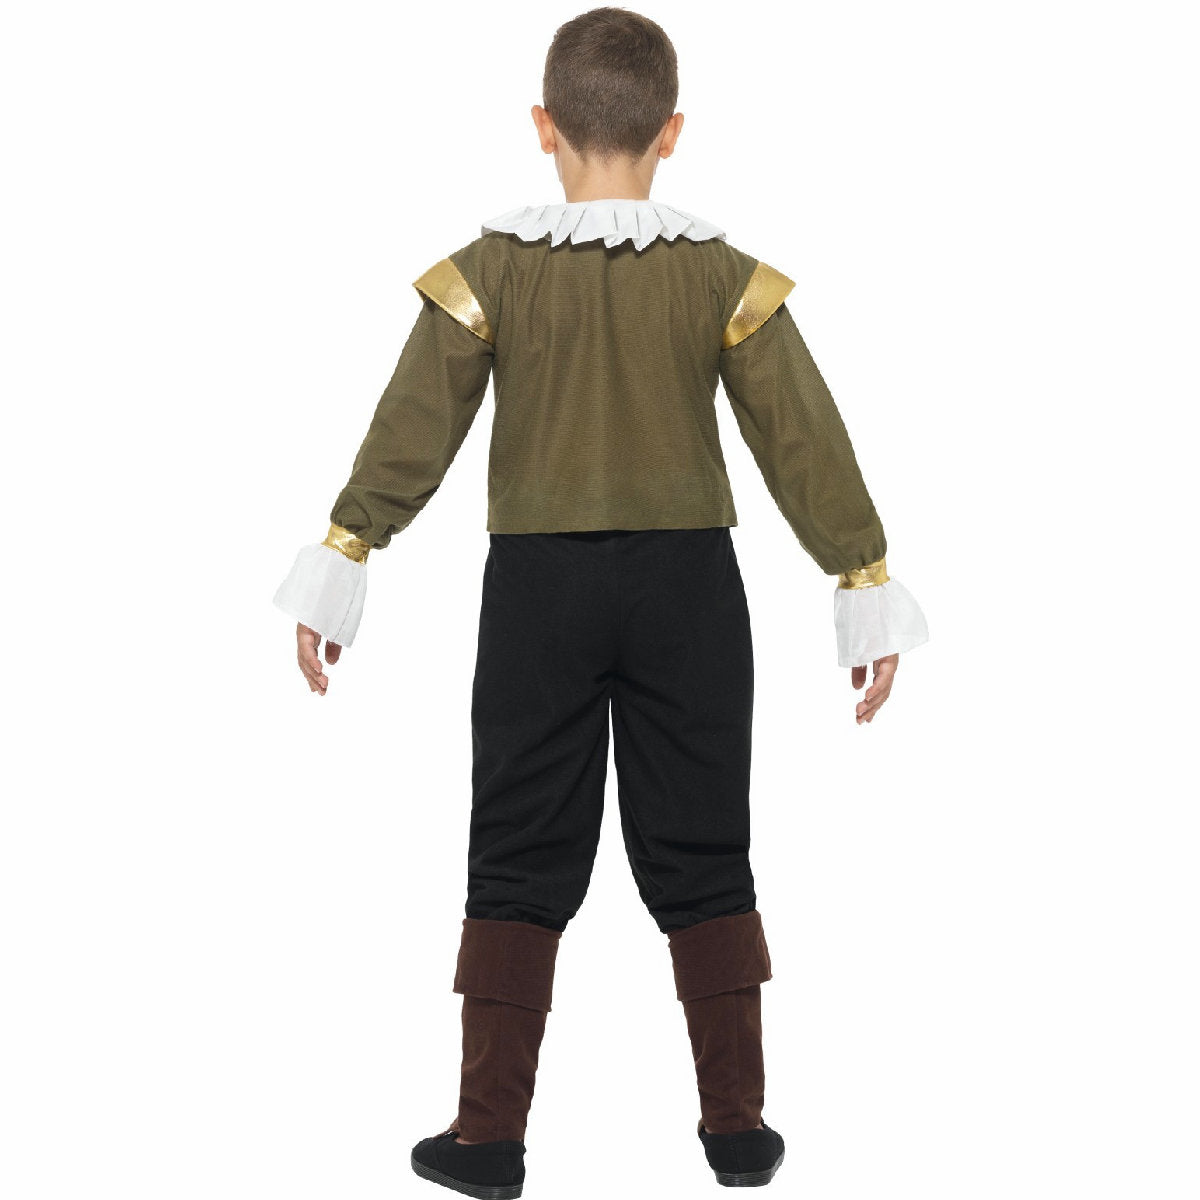 Shakespeare Boys Fancy Dress Costume with Moustache and Goatee